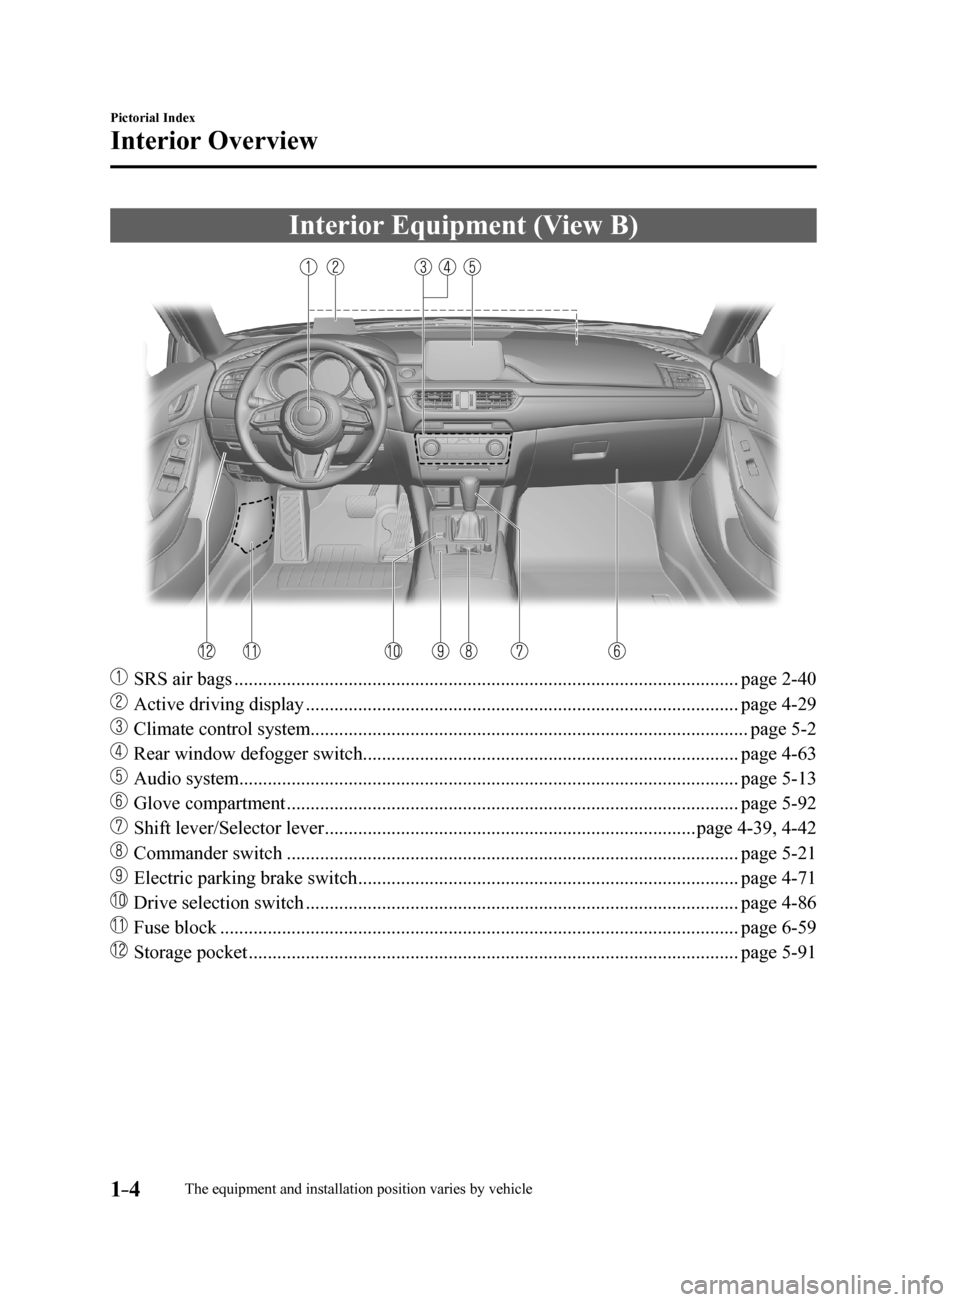 MAZDA MODEL 6 2017  Owners Manual (in English) 1–4
Pictorial Index
Interior Overview
Interior Equipment (View B)
 SRS air bags ........................................................................\.................................. page 2-40